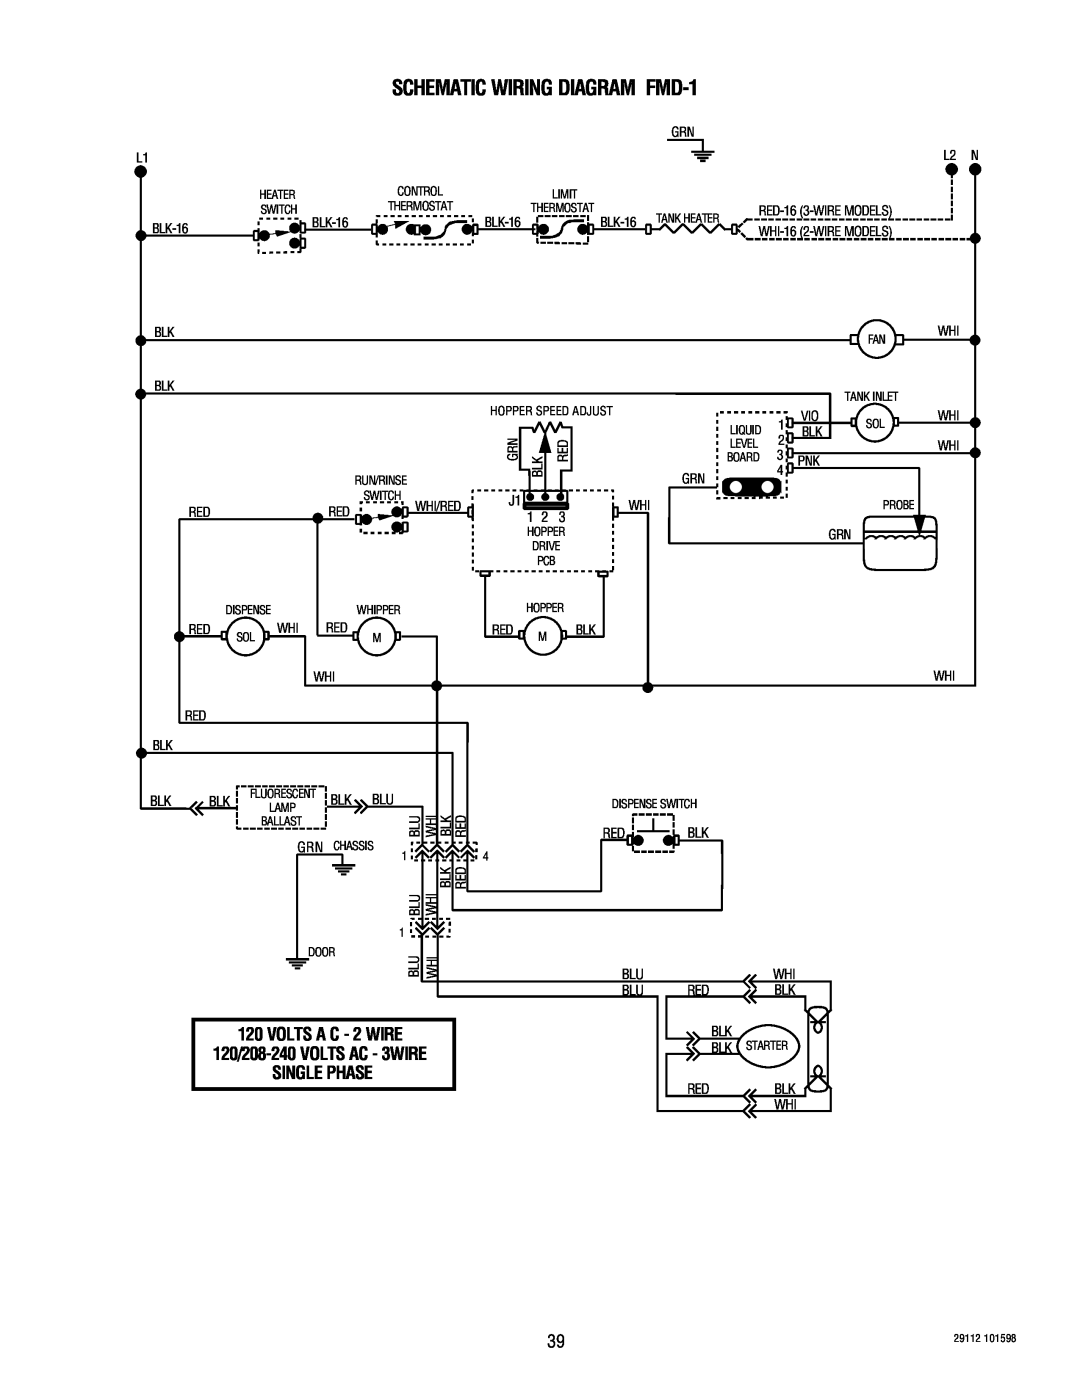 Bunn FMD-2 service manual SCHEMATIC WIRING DIAGRAM FMD-1, VOLTS A C - 2 WIRE, 120/208-240VOLTS AC - 3WIRE SINGLE PHASE 